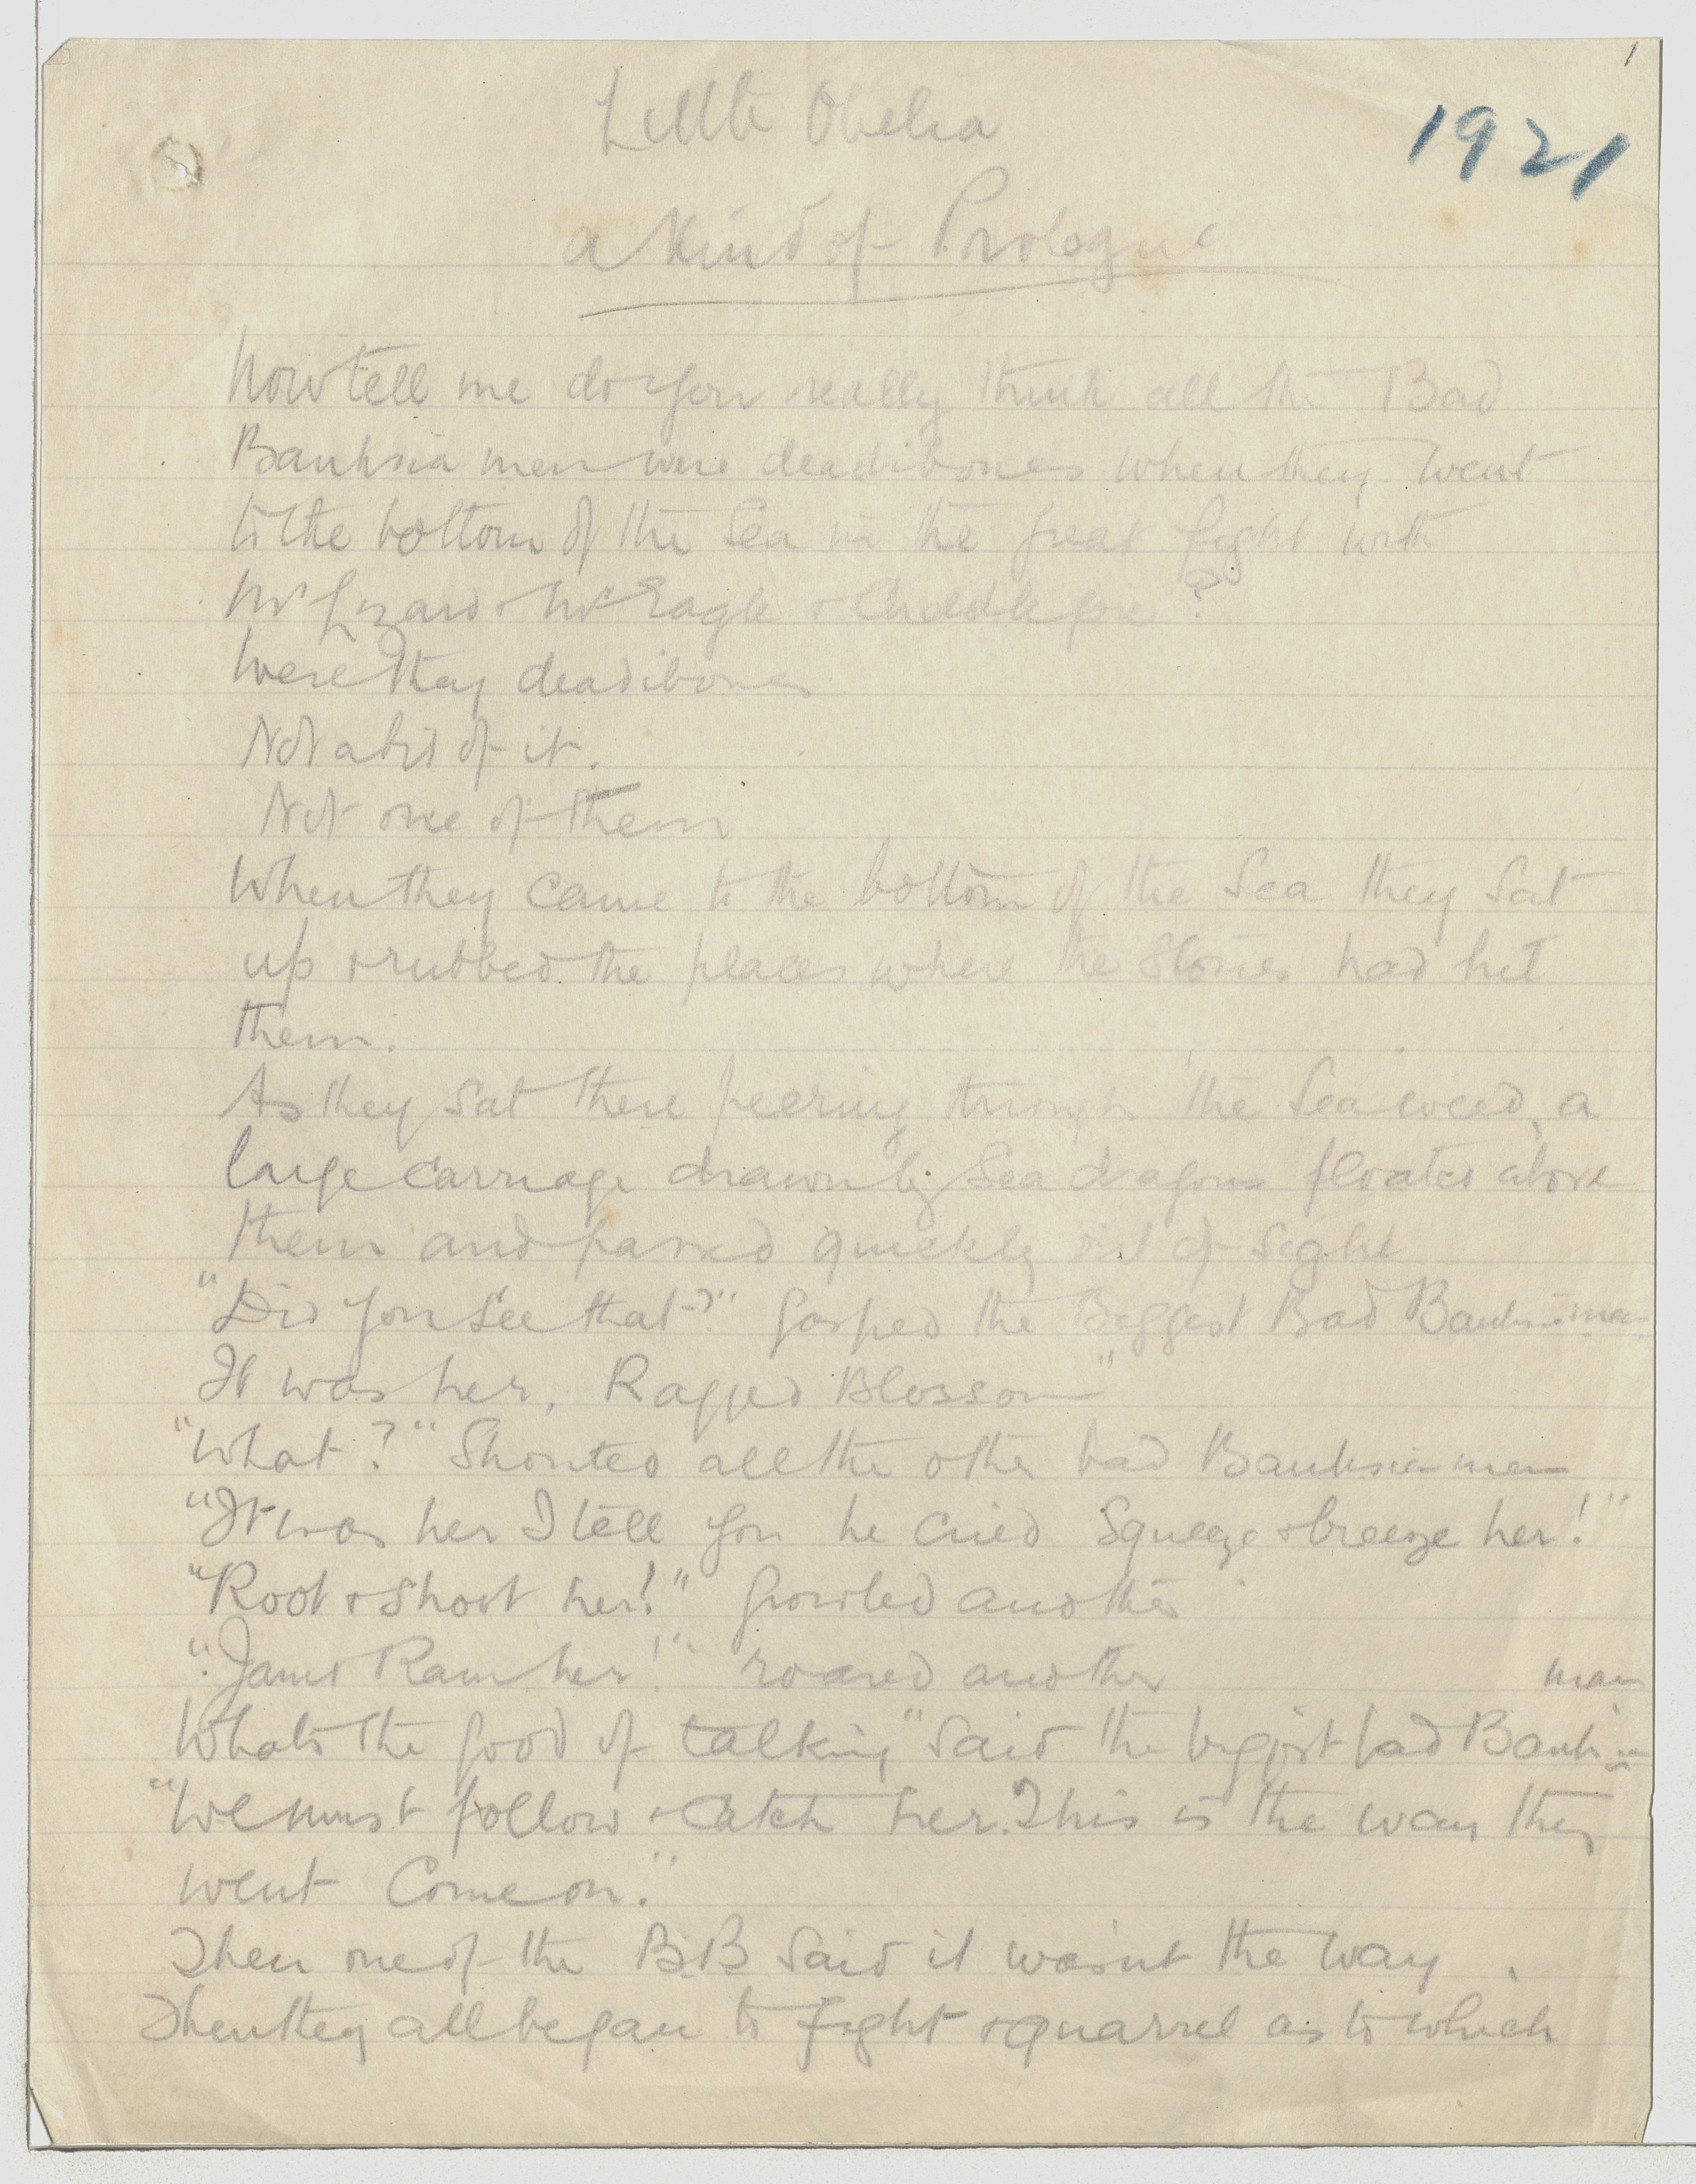 Manuscript for Little Obelia by May Gibbs, sent to publisher Angus and Robertson, 1921